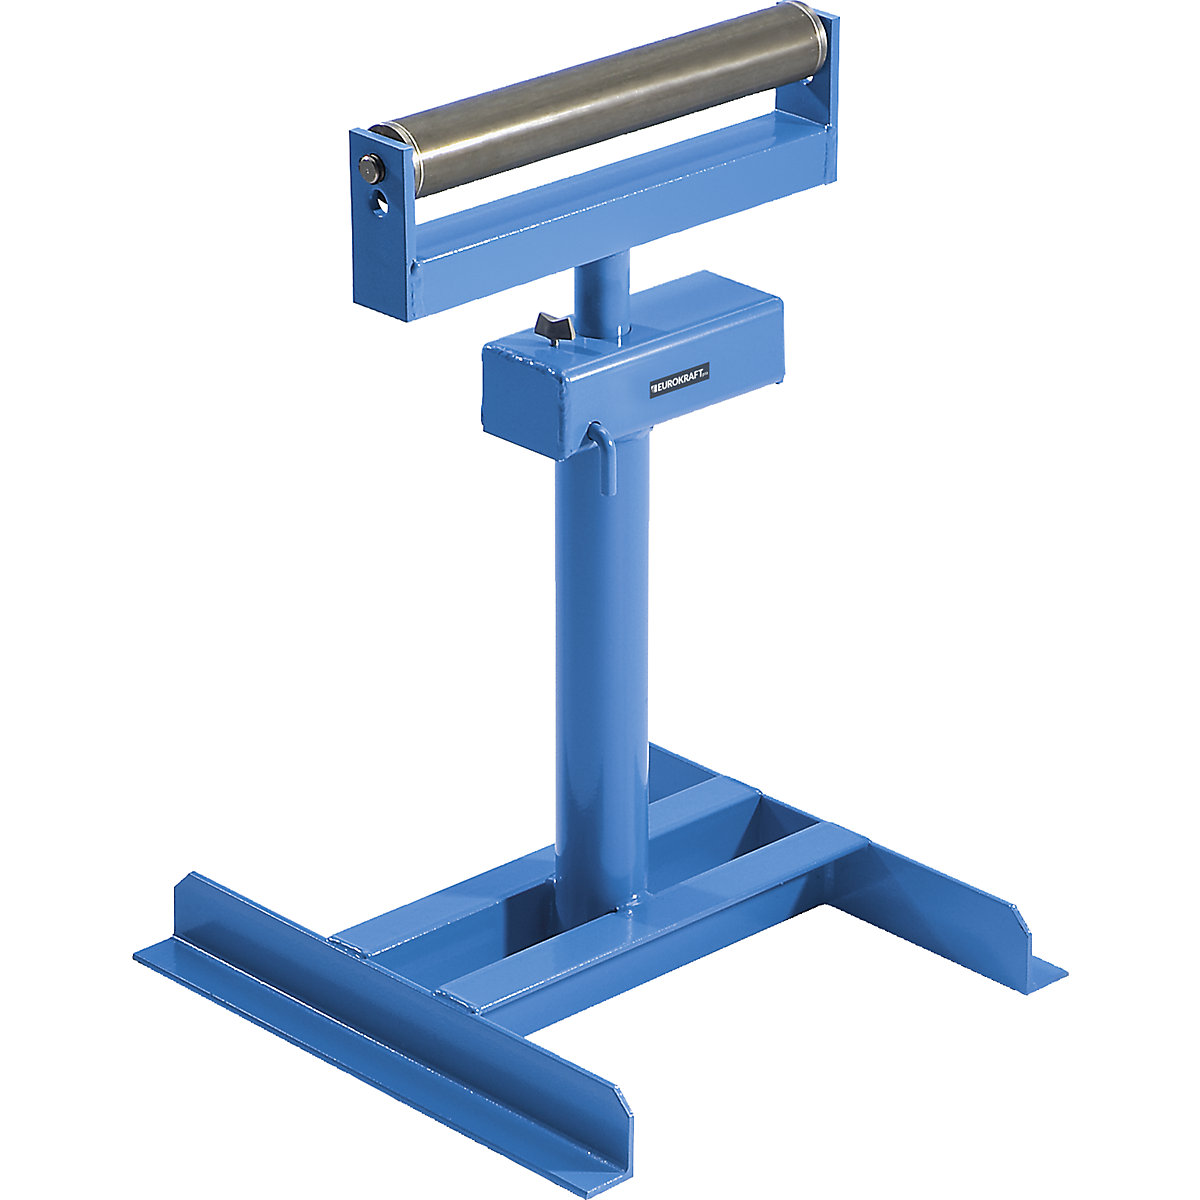 Roller stand – eurokraft pro: with steel roller, lifting range 610 – 970 mm